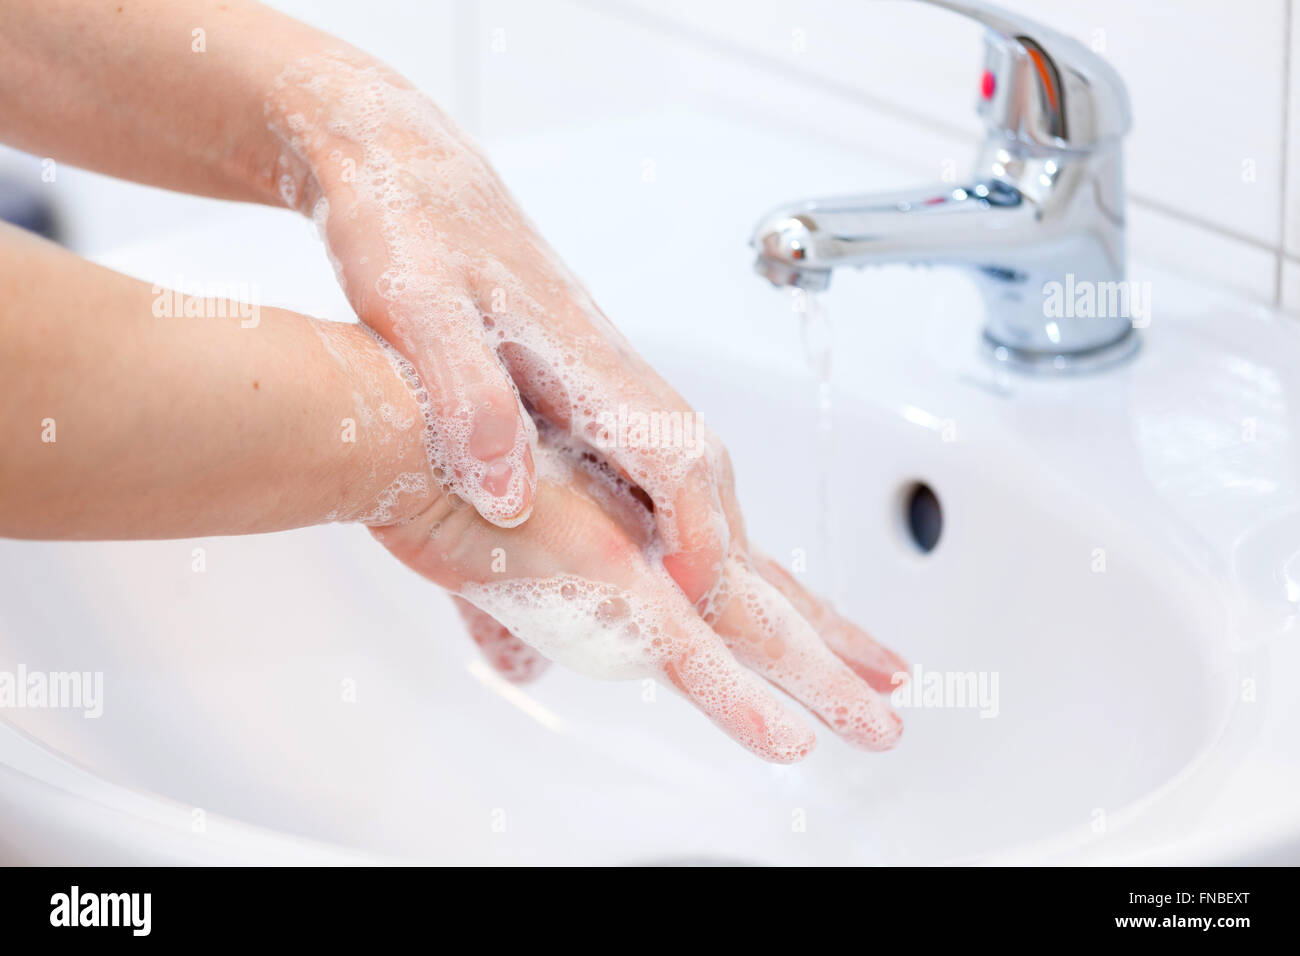 Washing of hands with soap under running water. Hygiene and Cleaning Hands Stock Photo